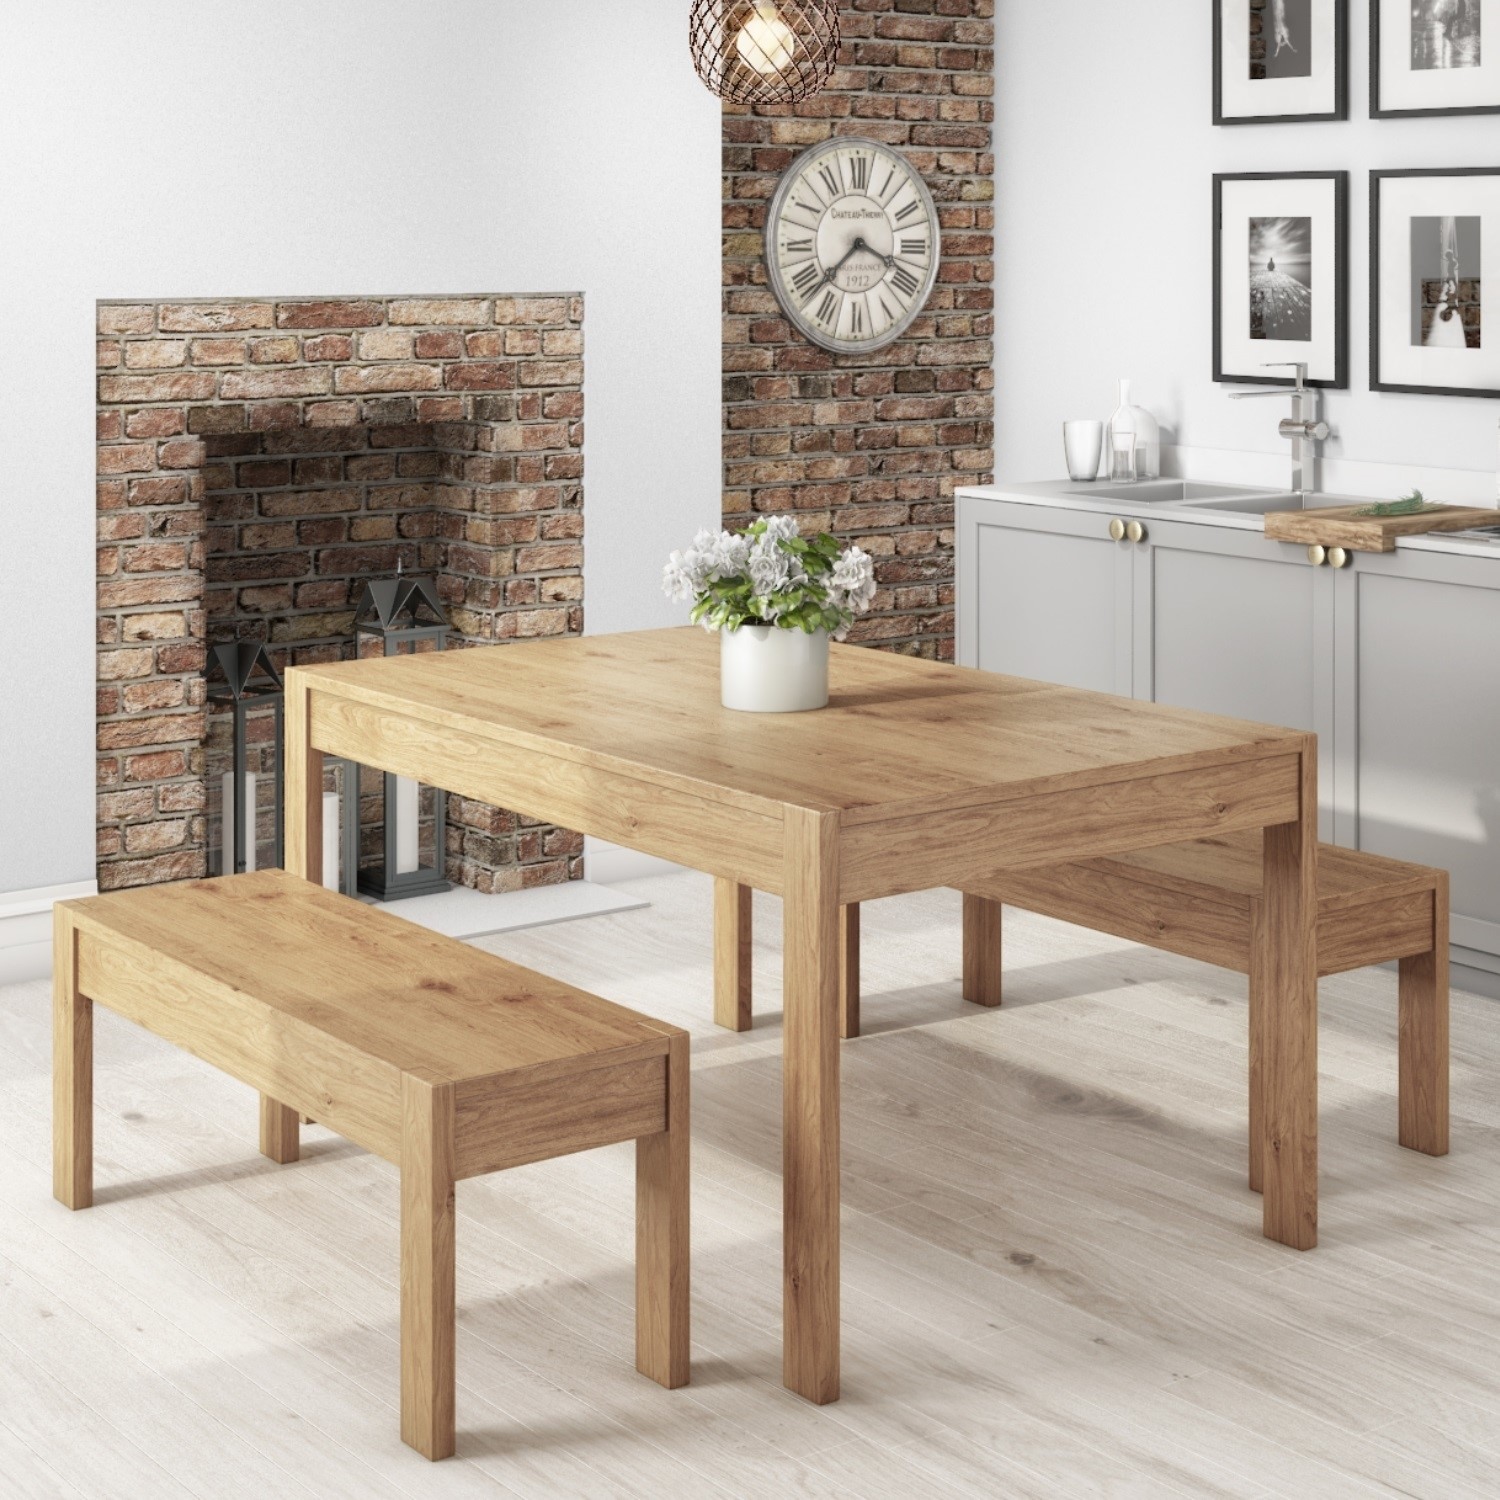 Natural Pine furniture-uk-shop Solid Wood Dining Table 2 Chairs Dining Set